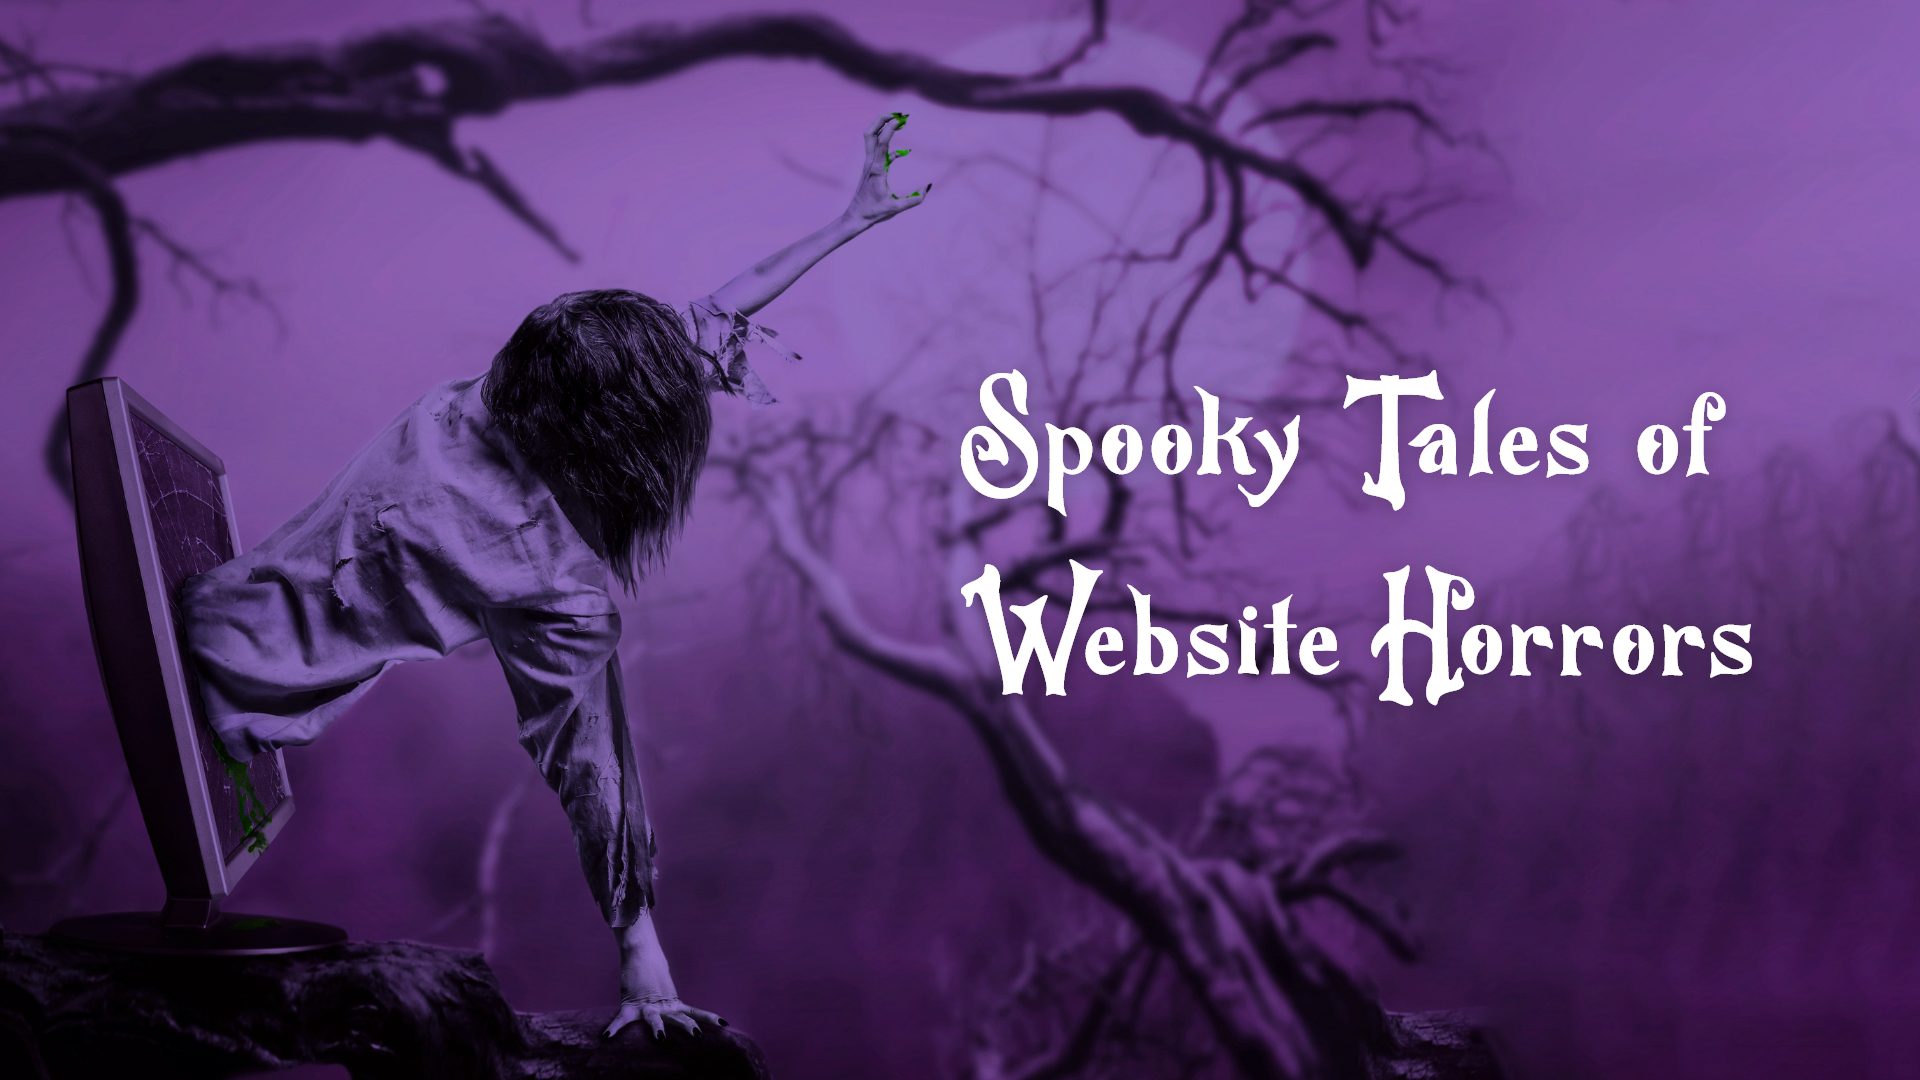 Spooky Tales of Website Horrors